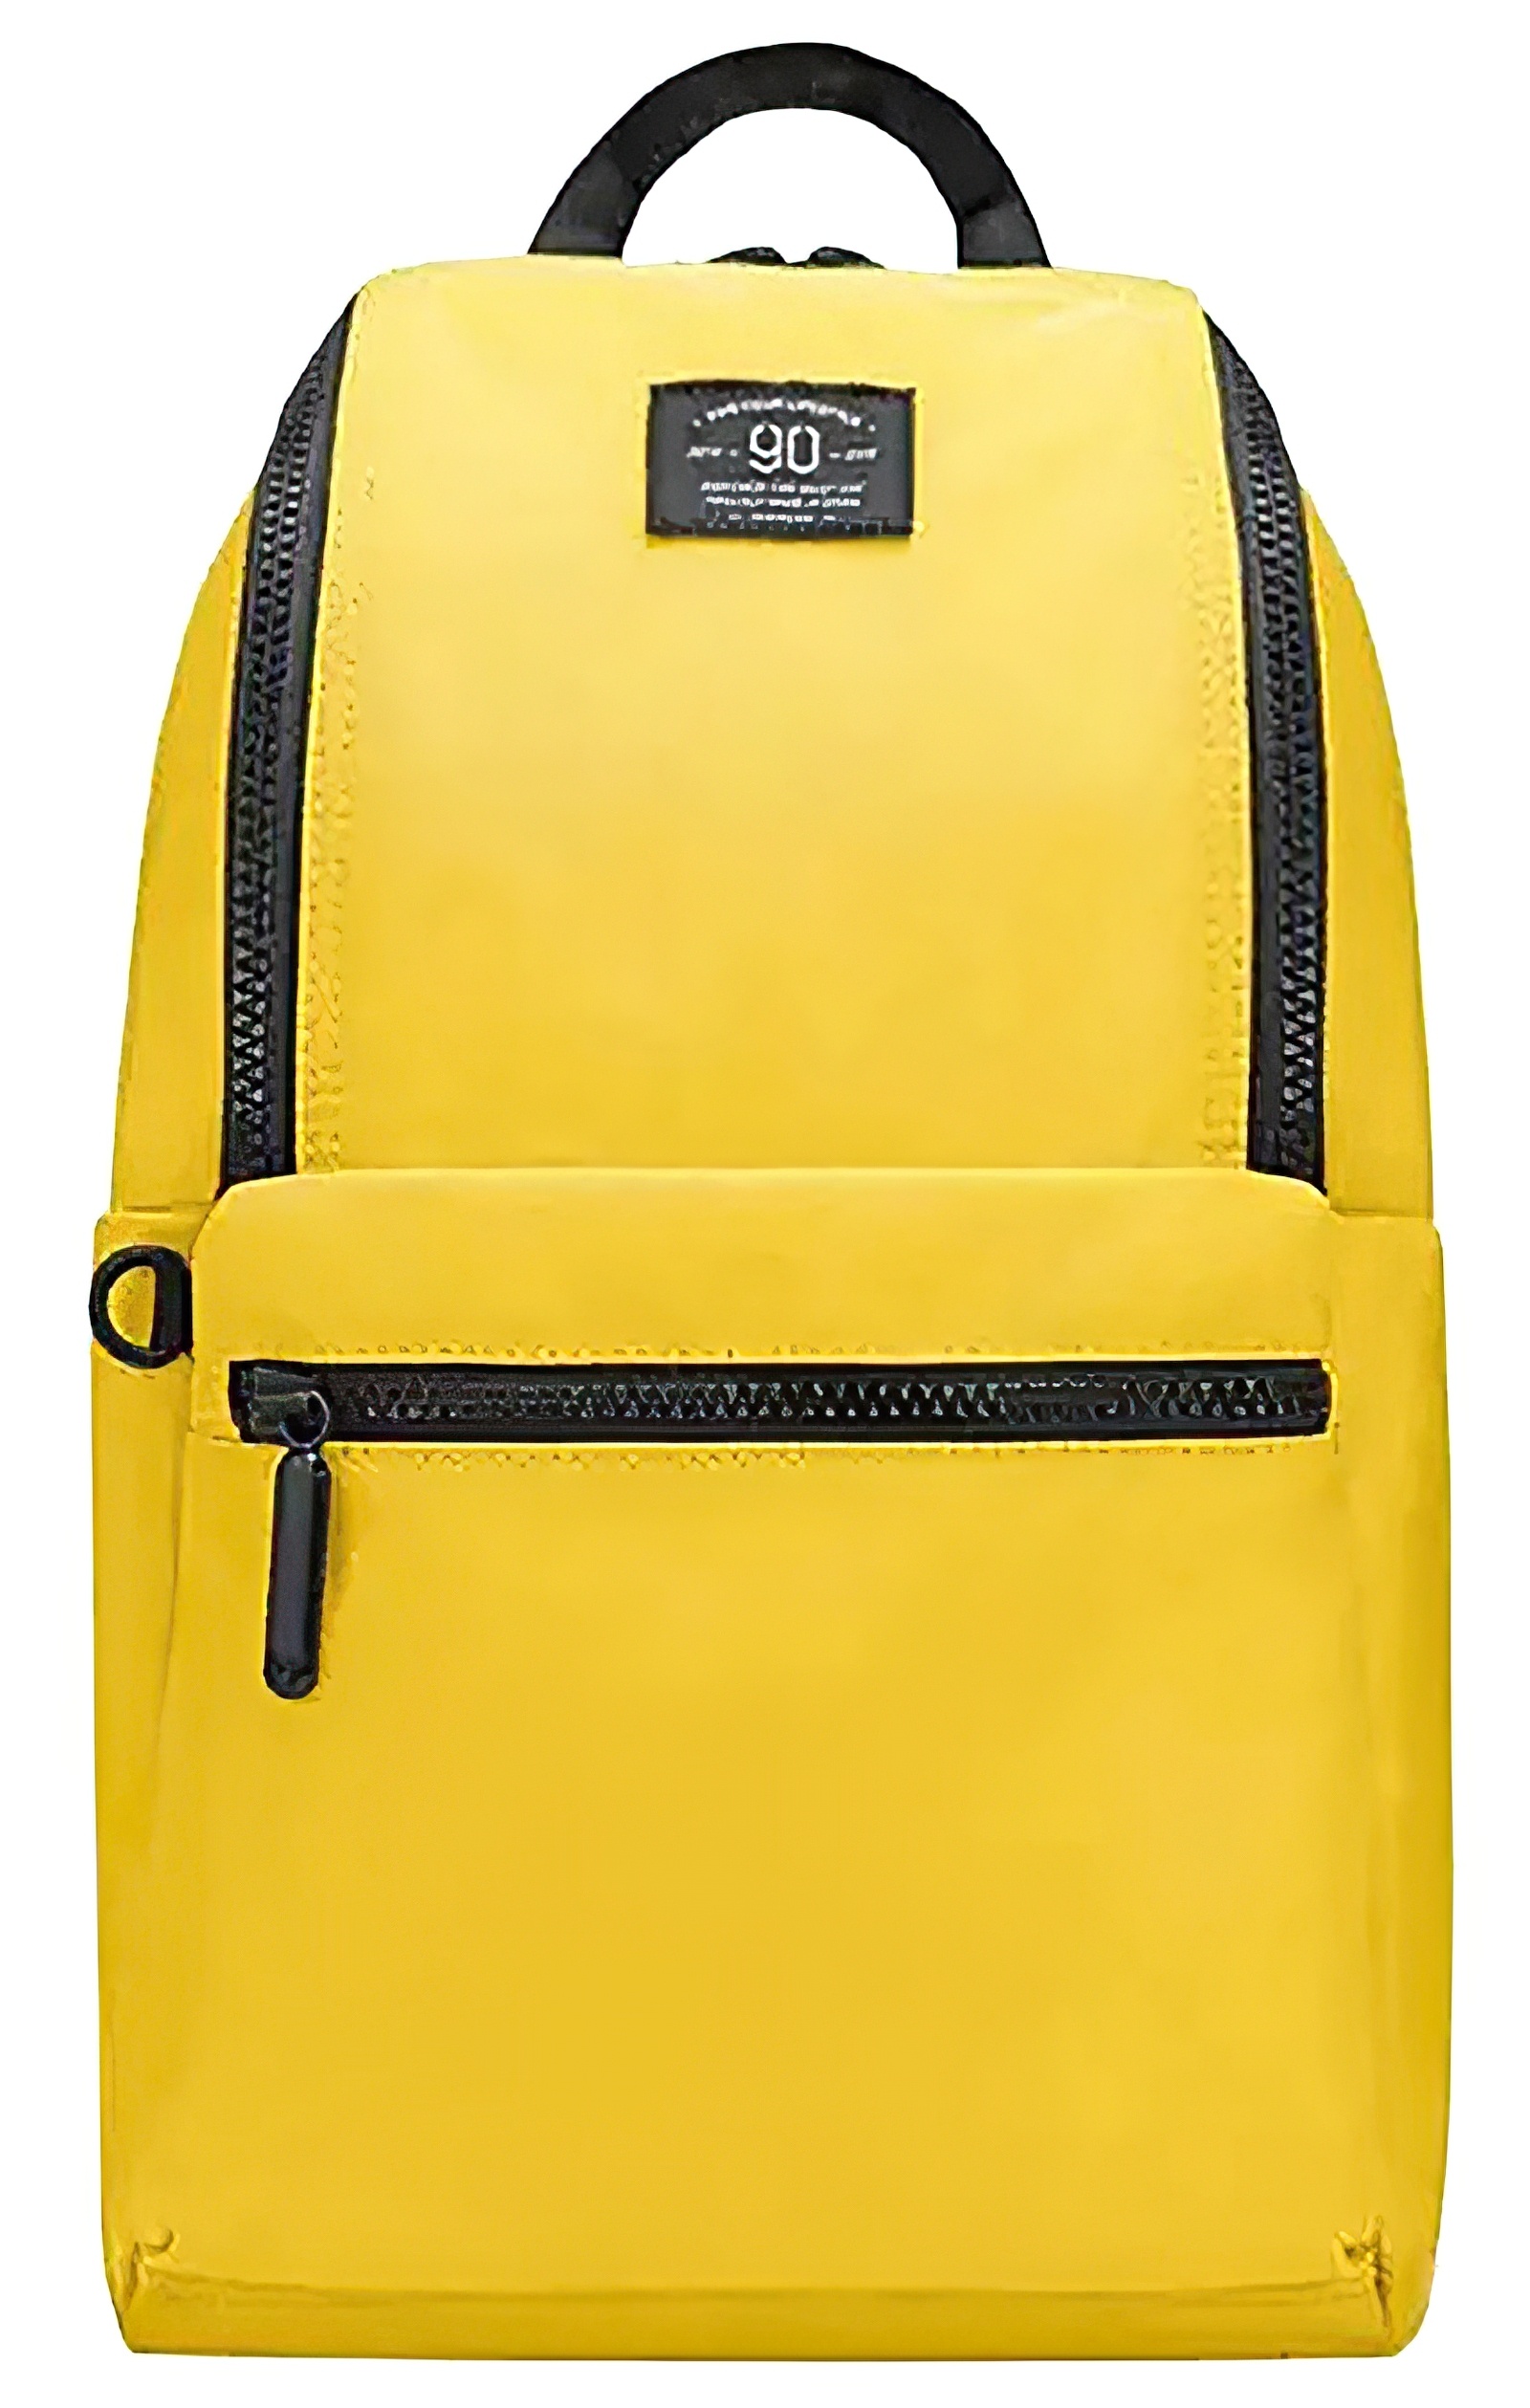 Xiaomi 90 Points Pro Leisure Travel Backpack 10L Yellow КАРКАМ